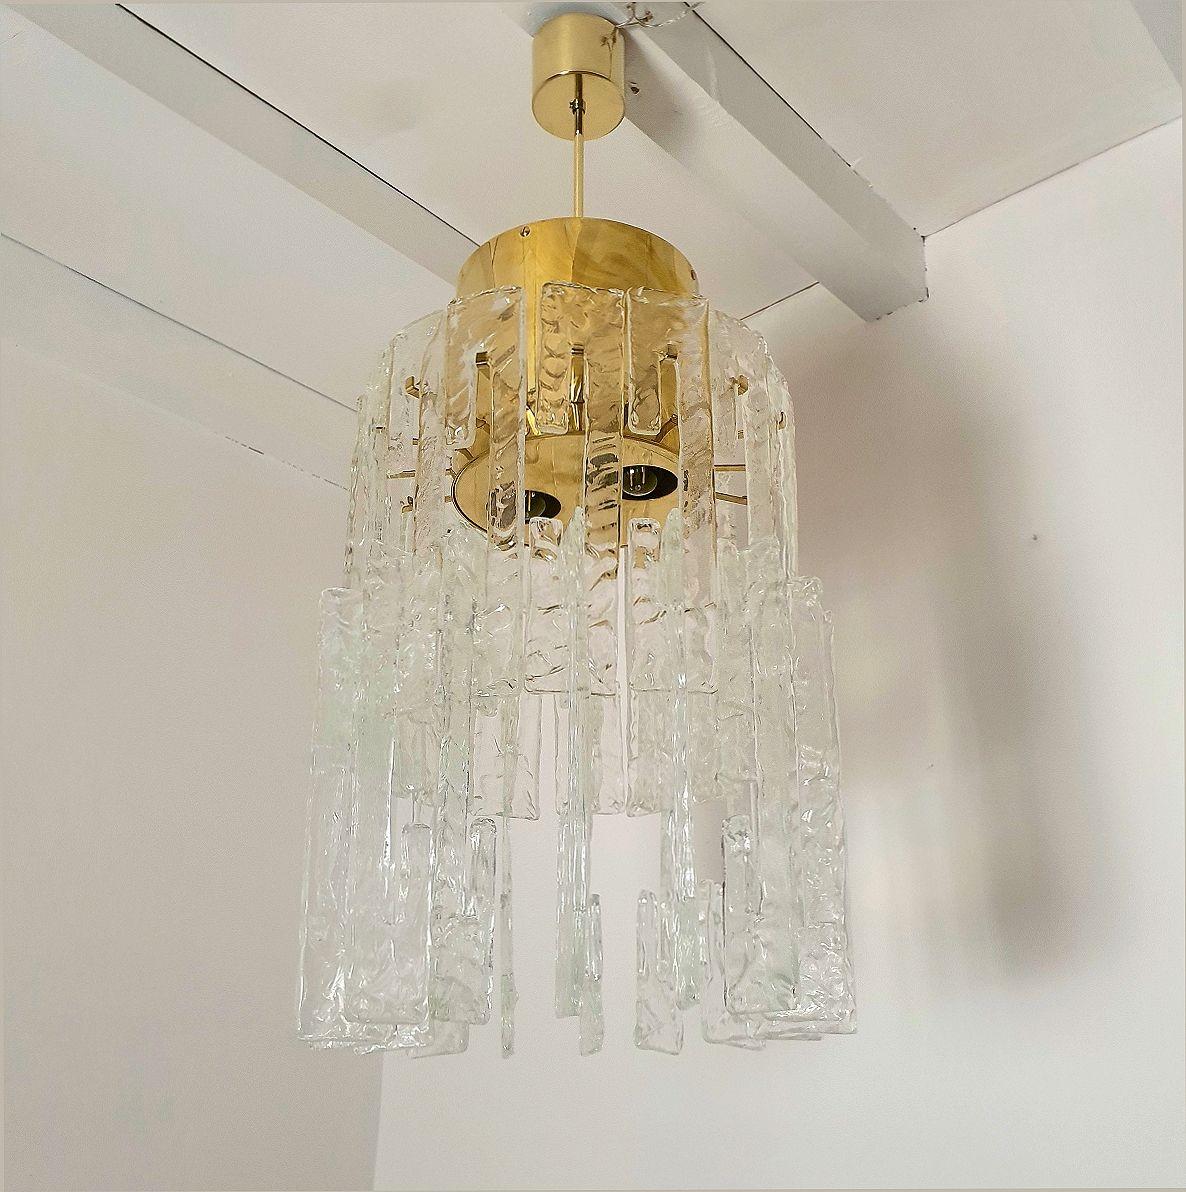 Mid-Century Modern brass and clear Murano glass pendant chandelier, by Mazzega, Italy 1970s
The brass frame is in polished brass. The clear interlocking Murano glass elements are textured and translucent.
They have a shape of letter C, tall and